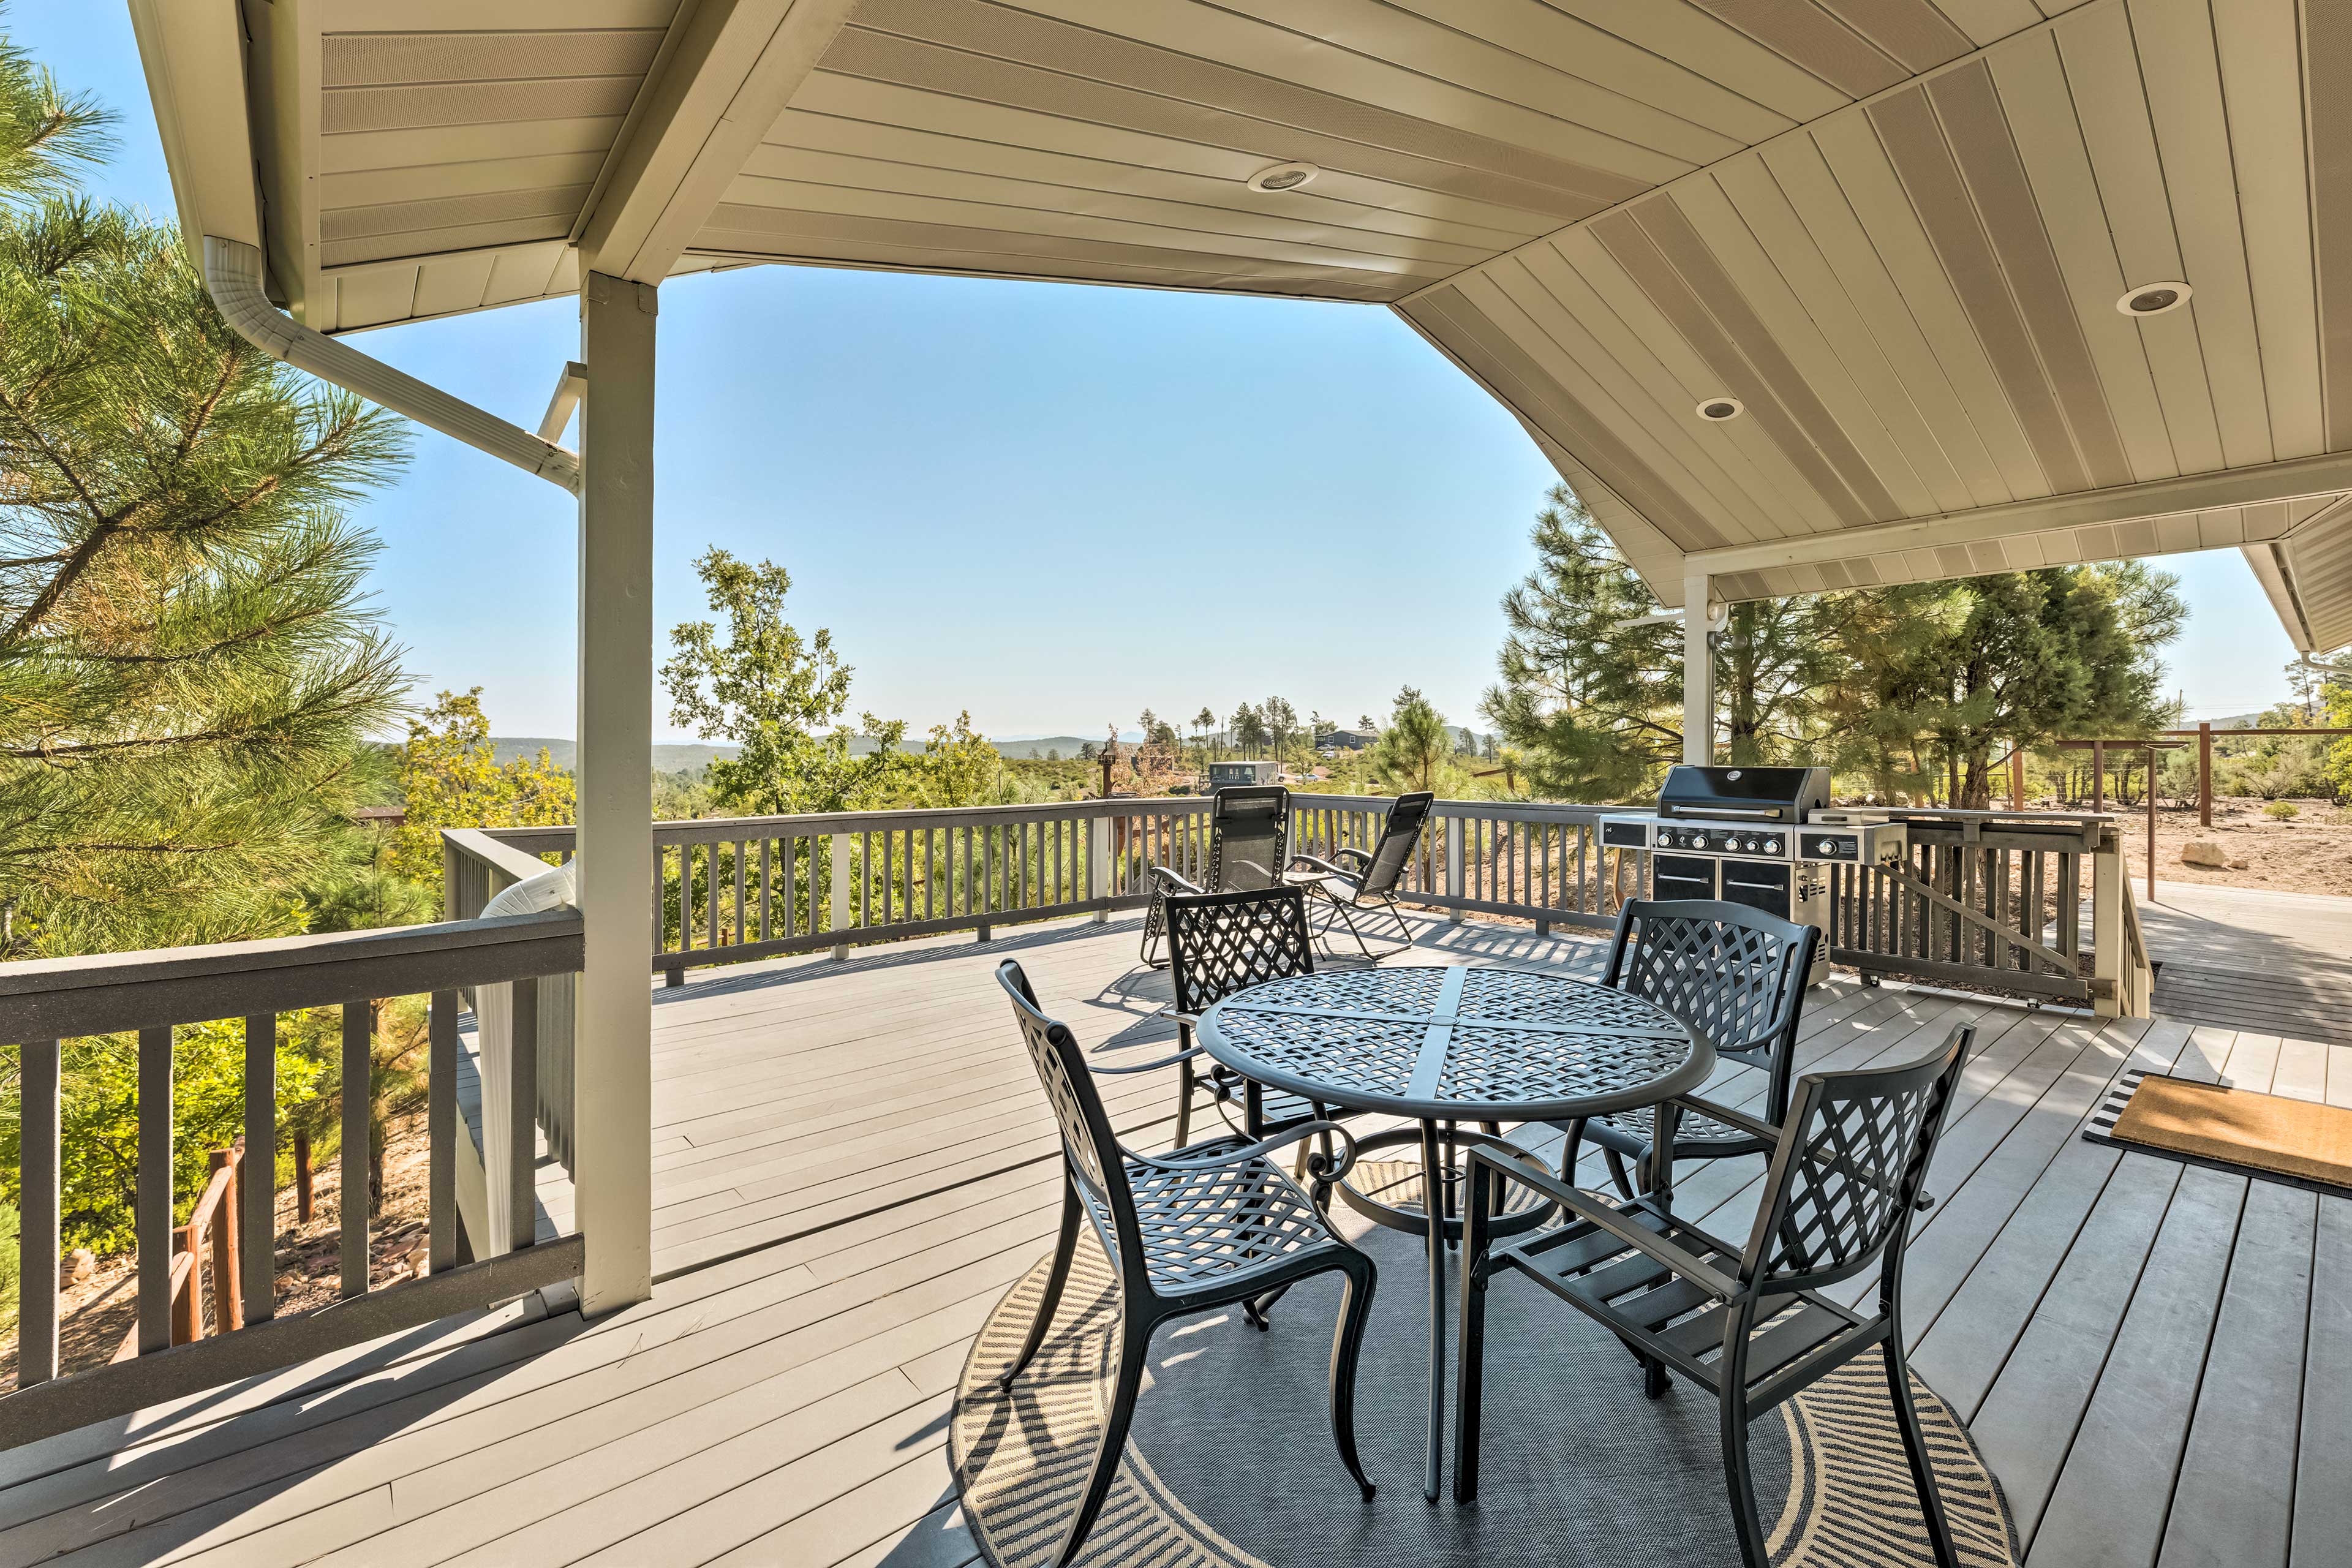 Property Image 1 - Hilltop Haven: Deck, Grill & National Forest View!